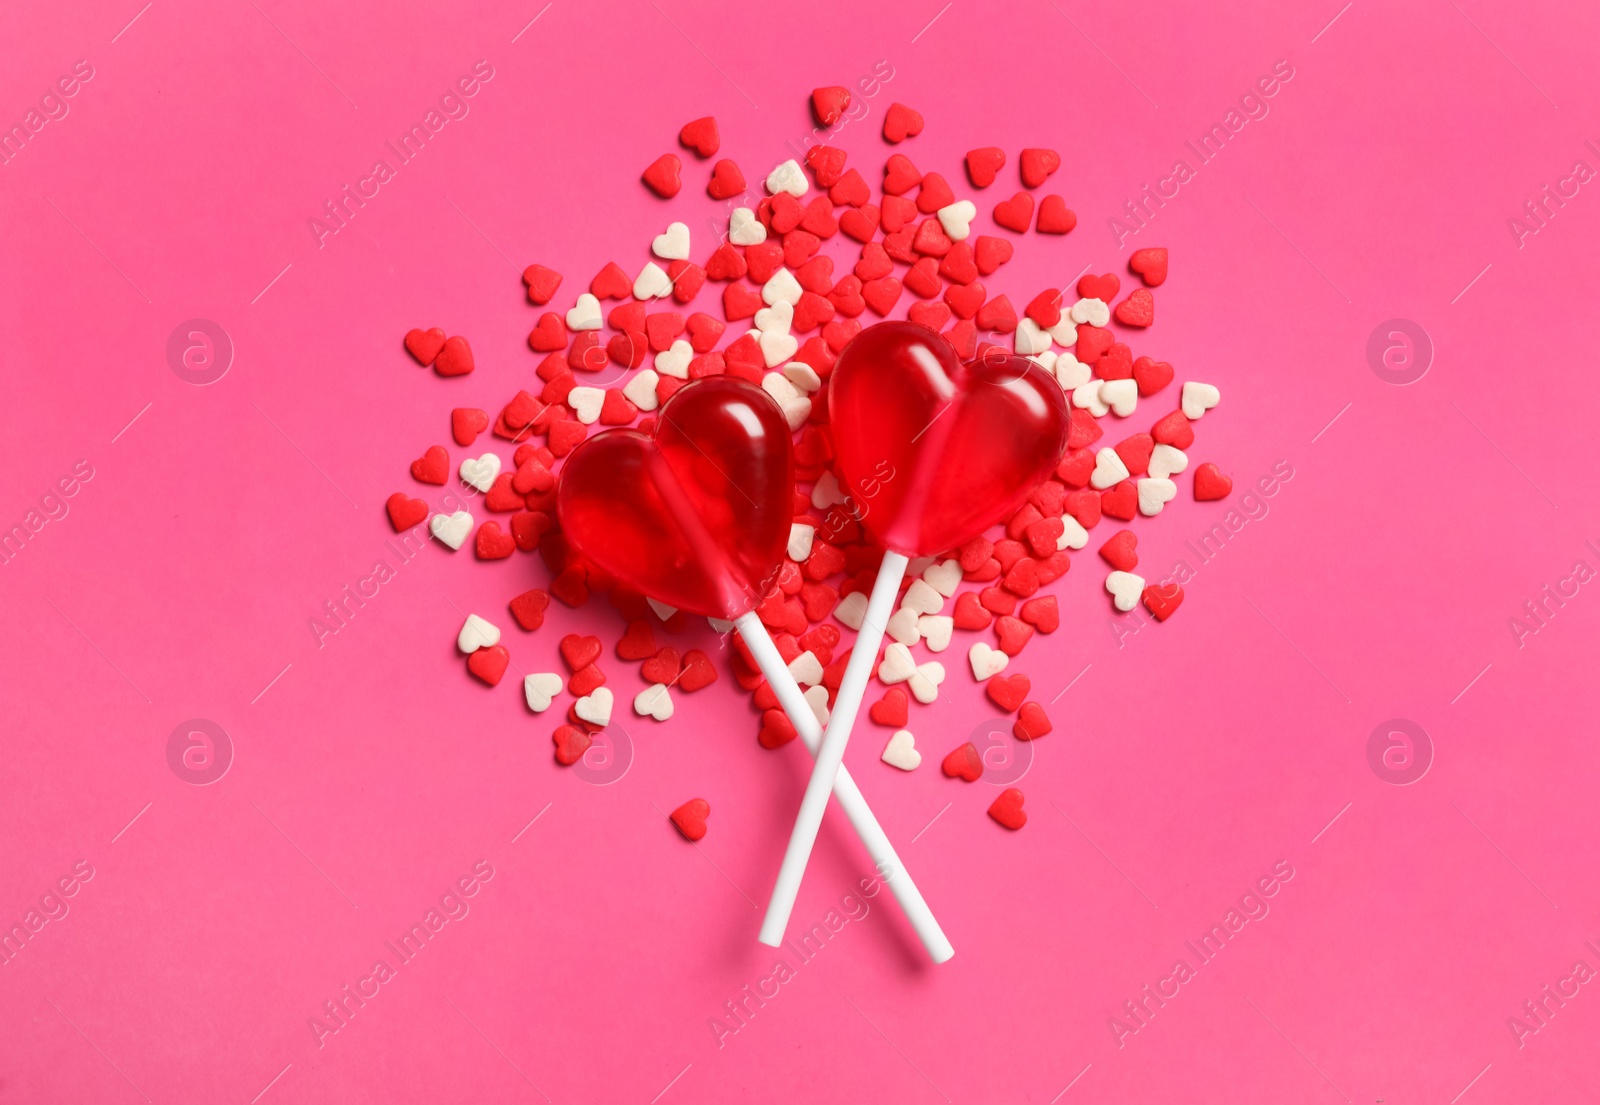 Photo of Sweet heart shaped lollipops and sprinkles on pink background, flat lay. Valentine's day celebration